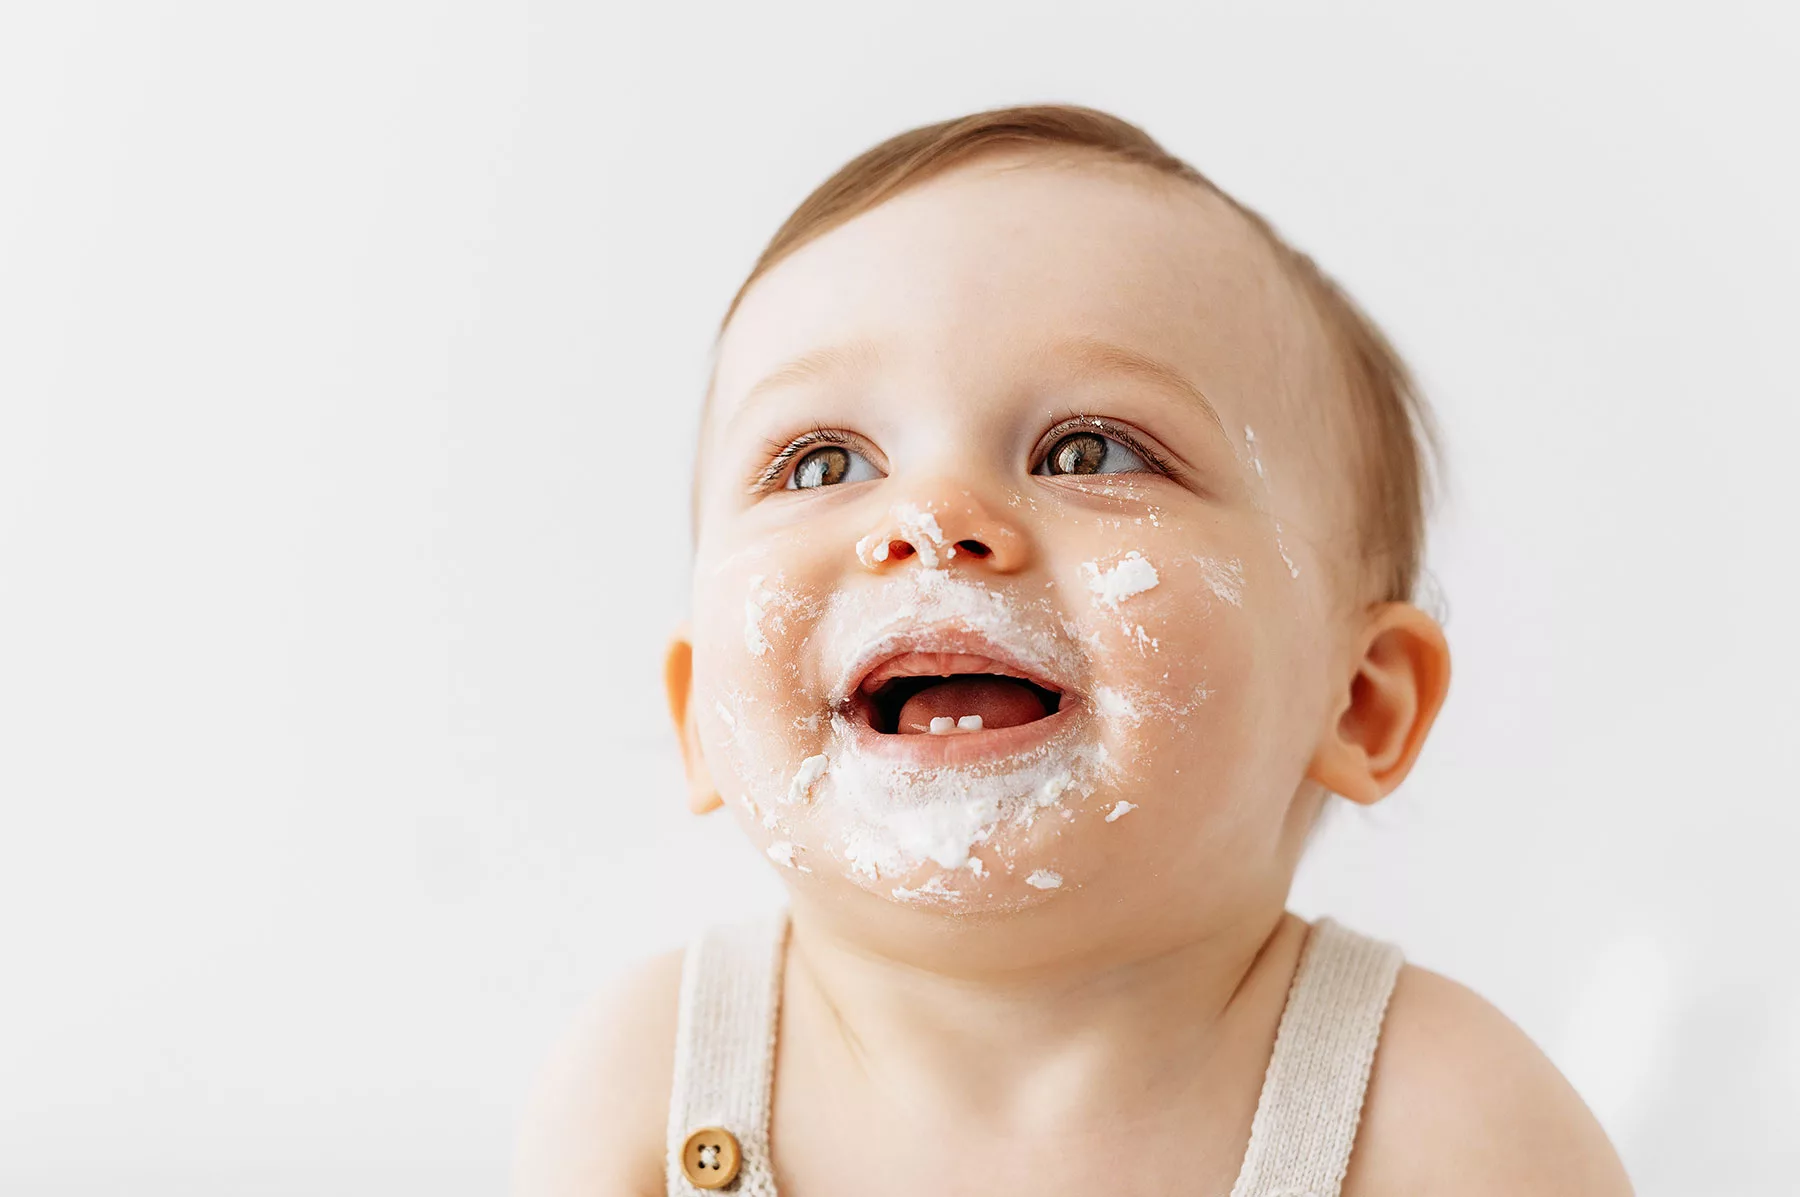 Baby boy smiling with big brown eyes and cake around his mouth. Sidcup cake smash photoshoot.